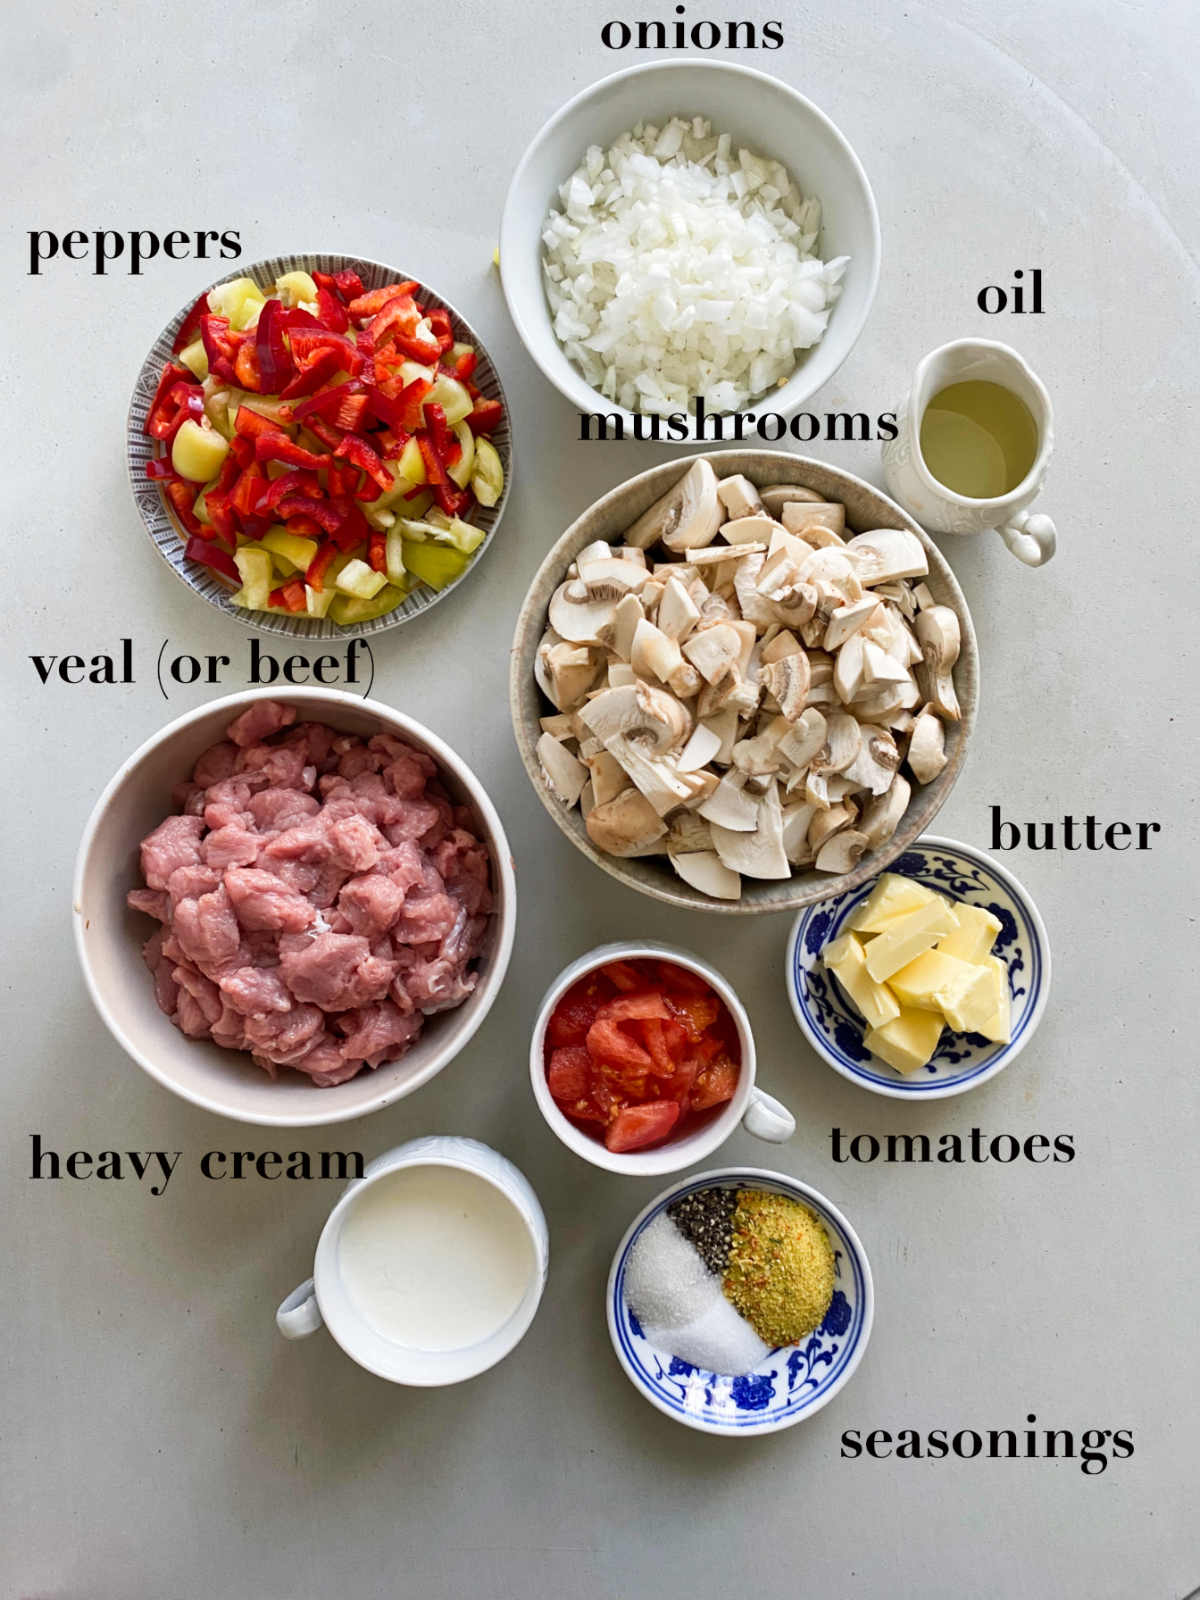 Nine ingredients in different bowls on a white background: peppers, tomatoes, onions, mushrooms, veal, oil, butter, heavy cream, tomato and seasonings.